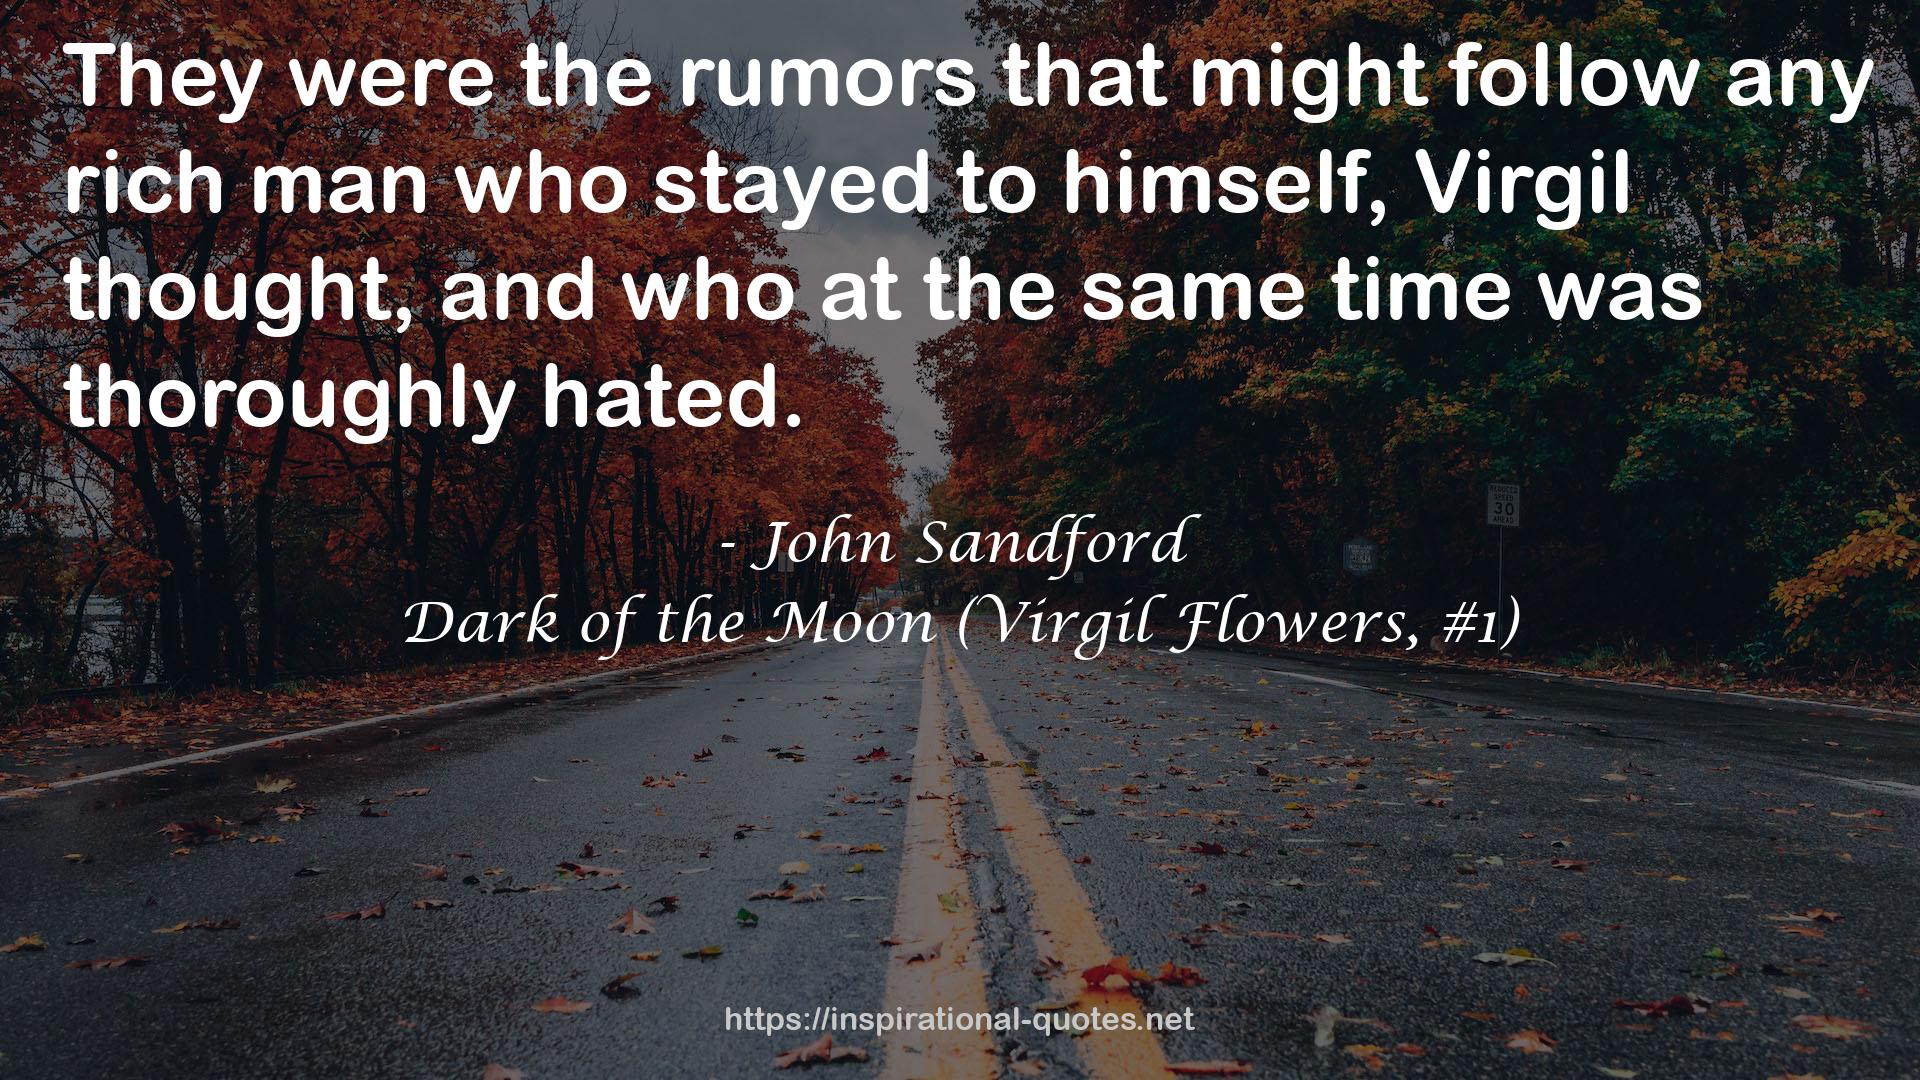 Dark of the Moon (Virgil Flowers, #1) QUOTES